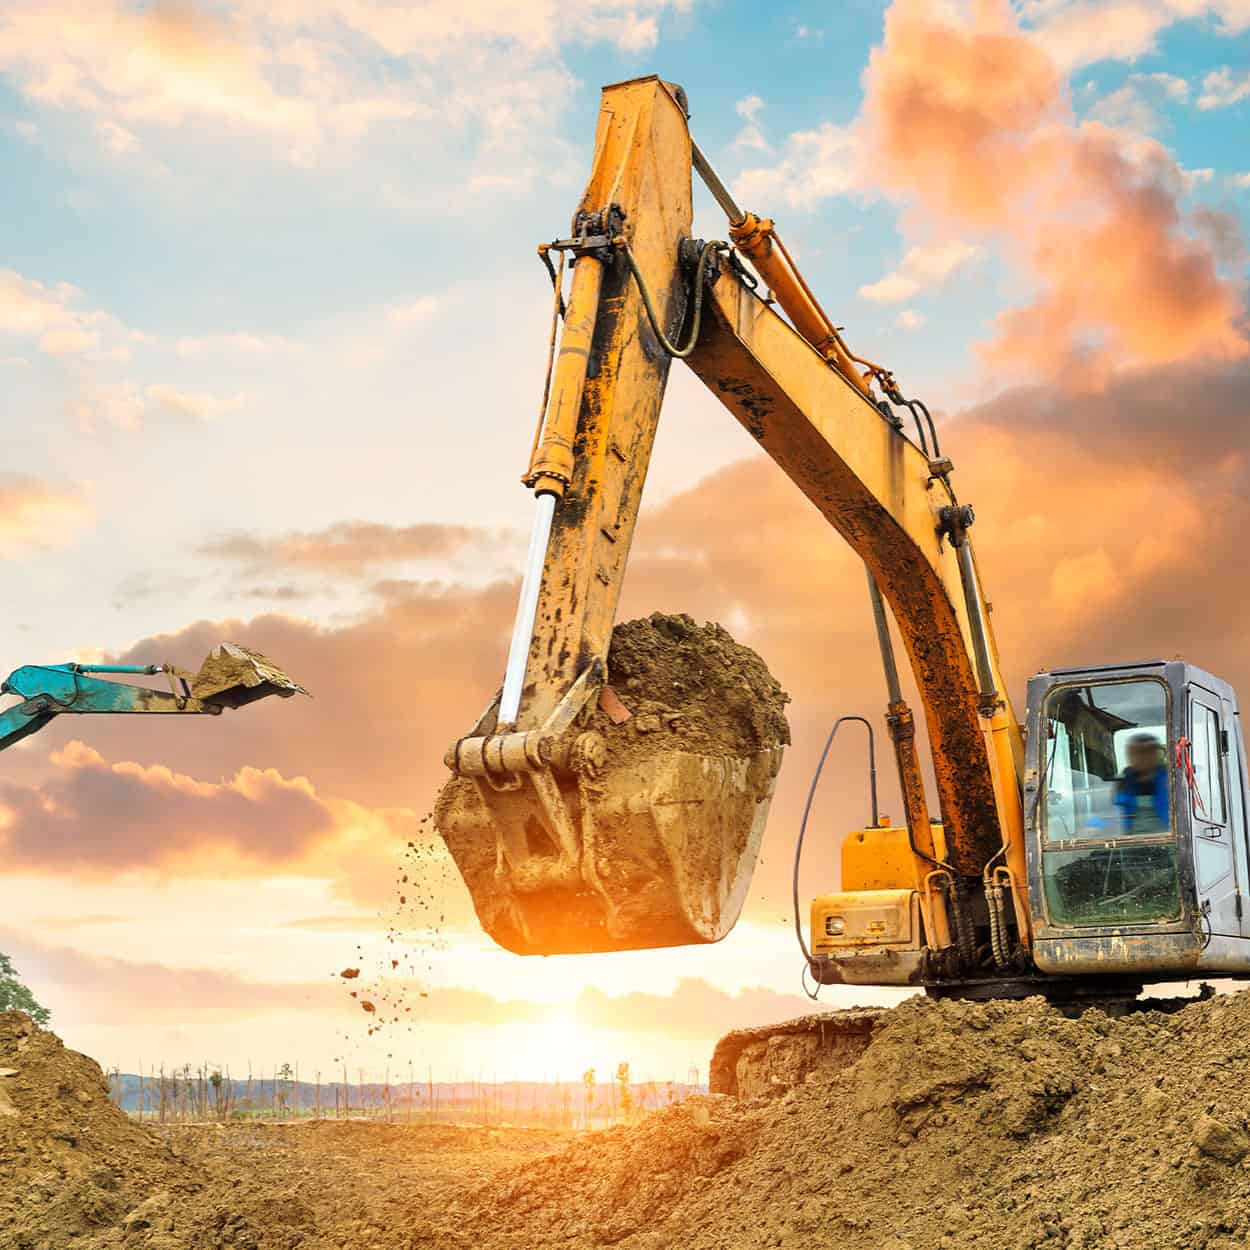 Excavator digging in the ground in preparation to lay foundation